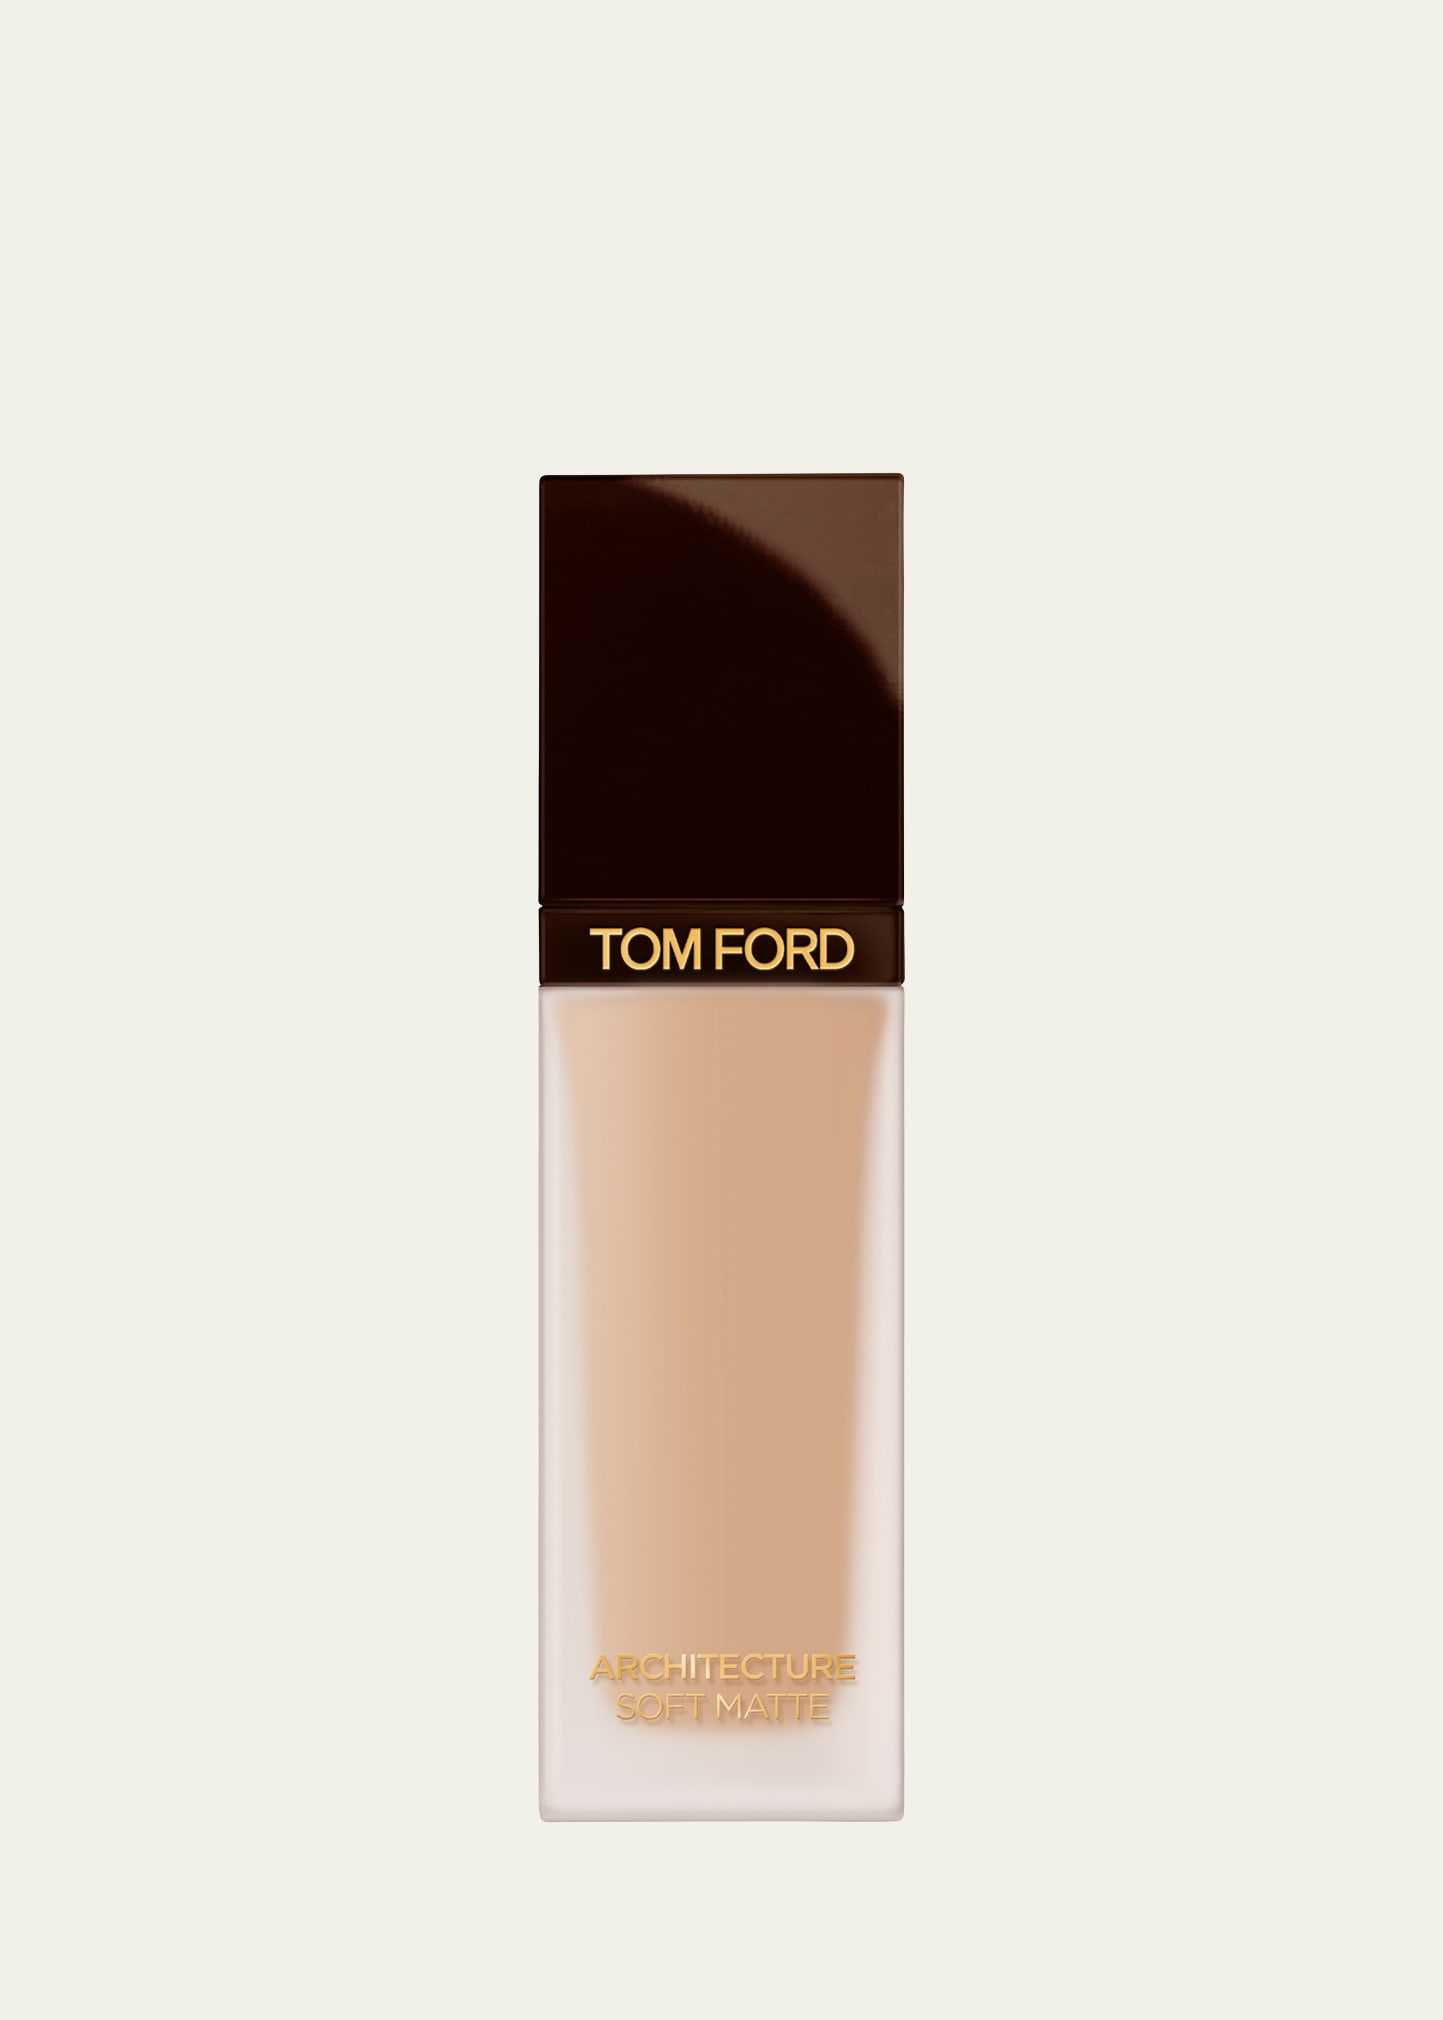 Tom Ford Architecture Soft Matte Foundation In Asm - 5.5 Bisque